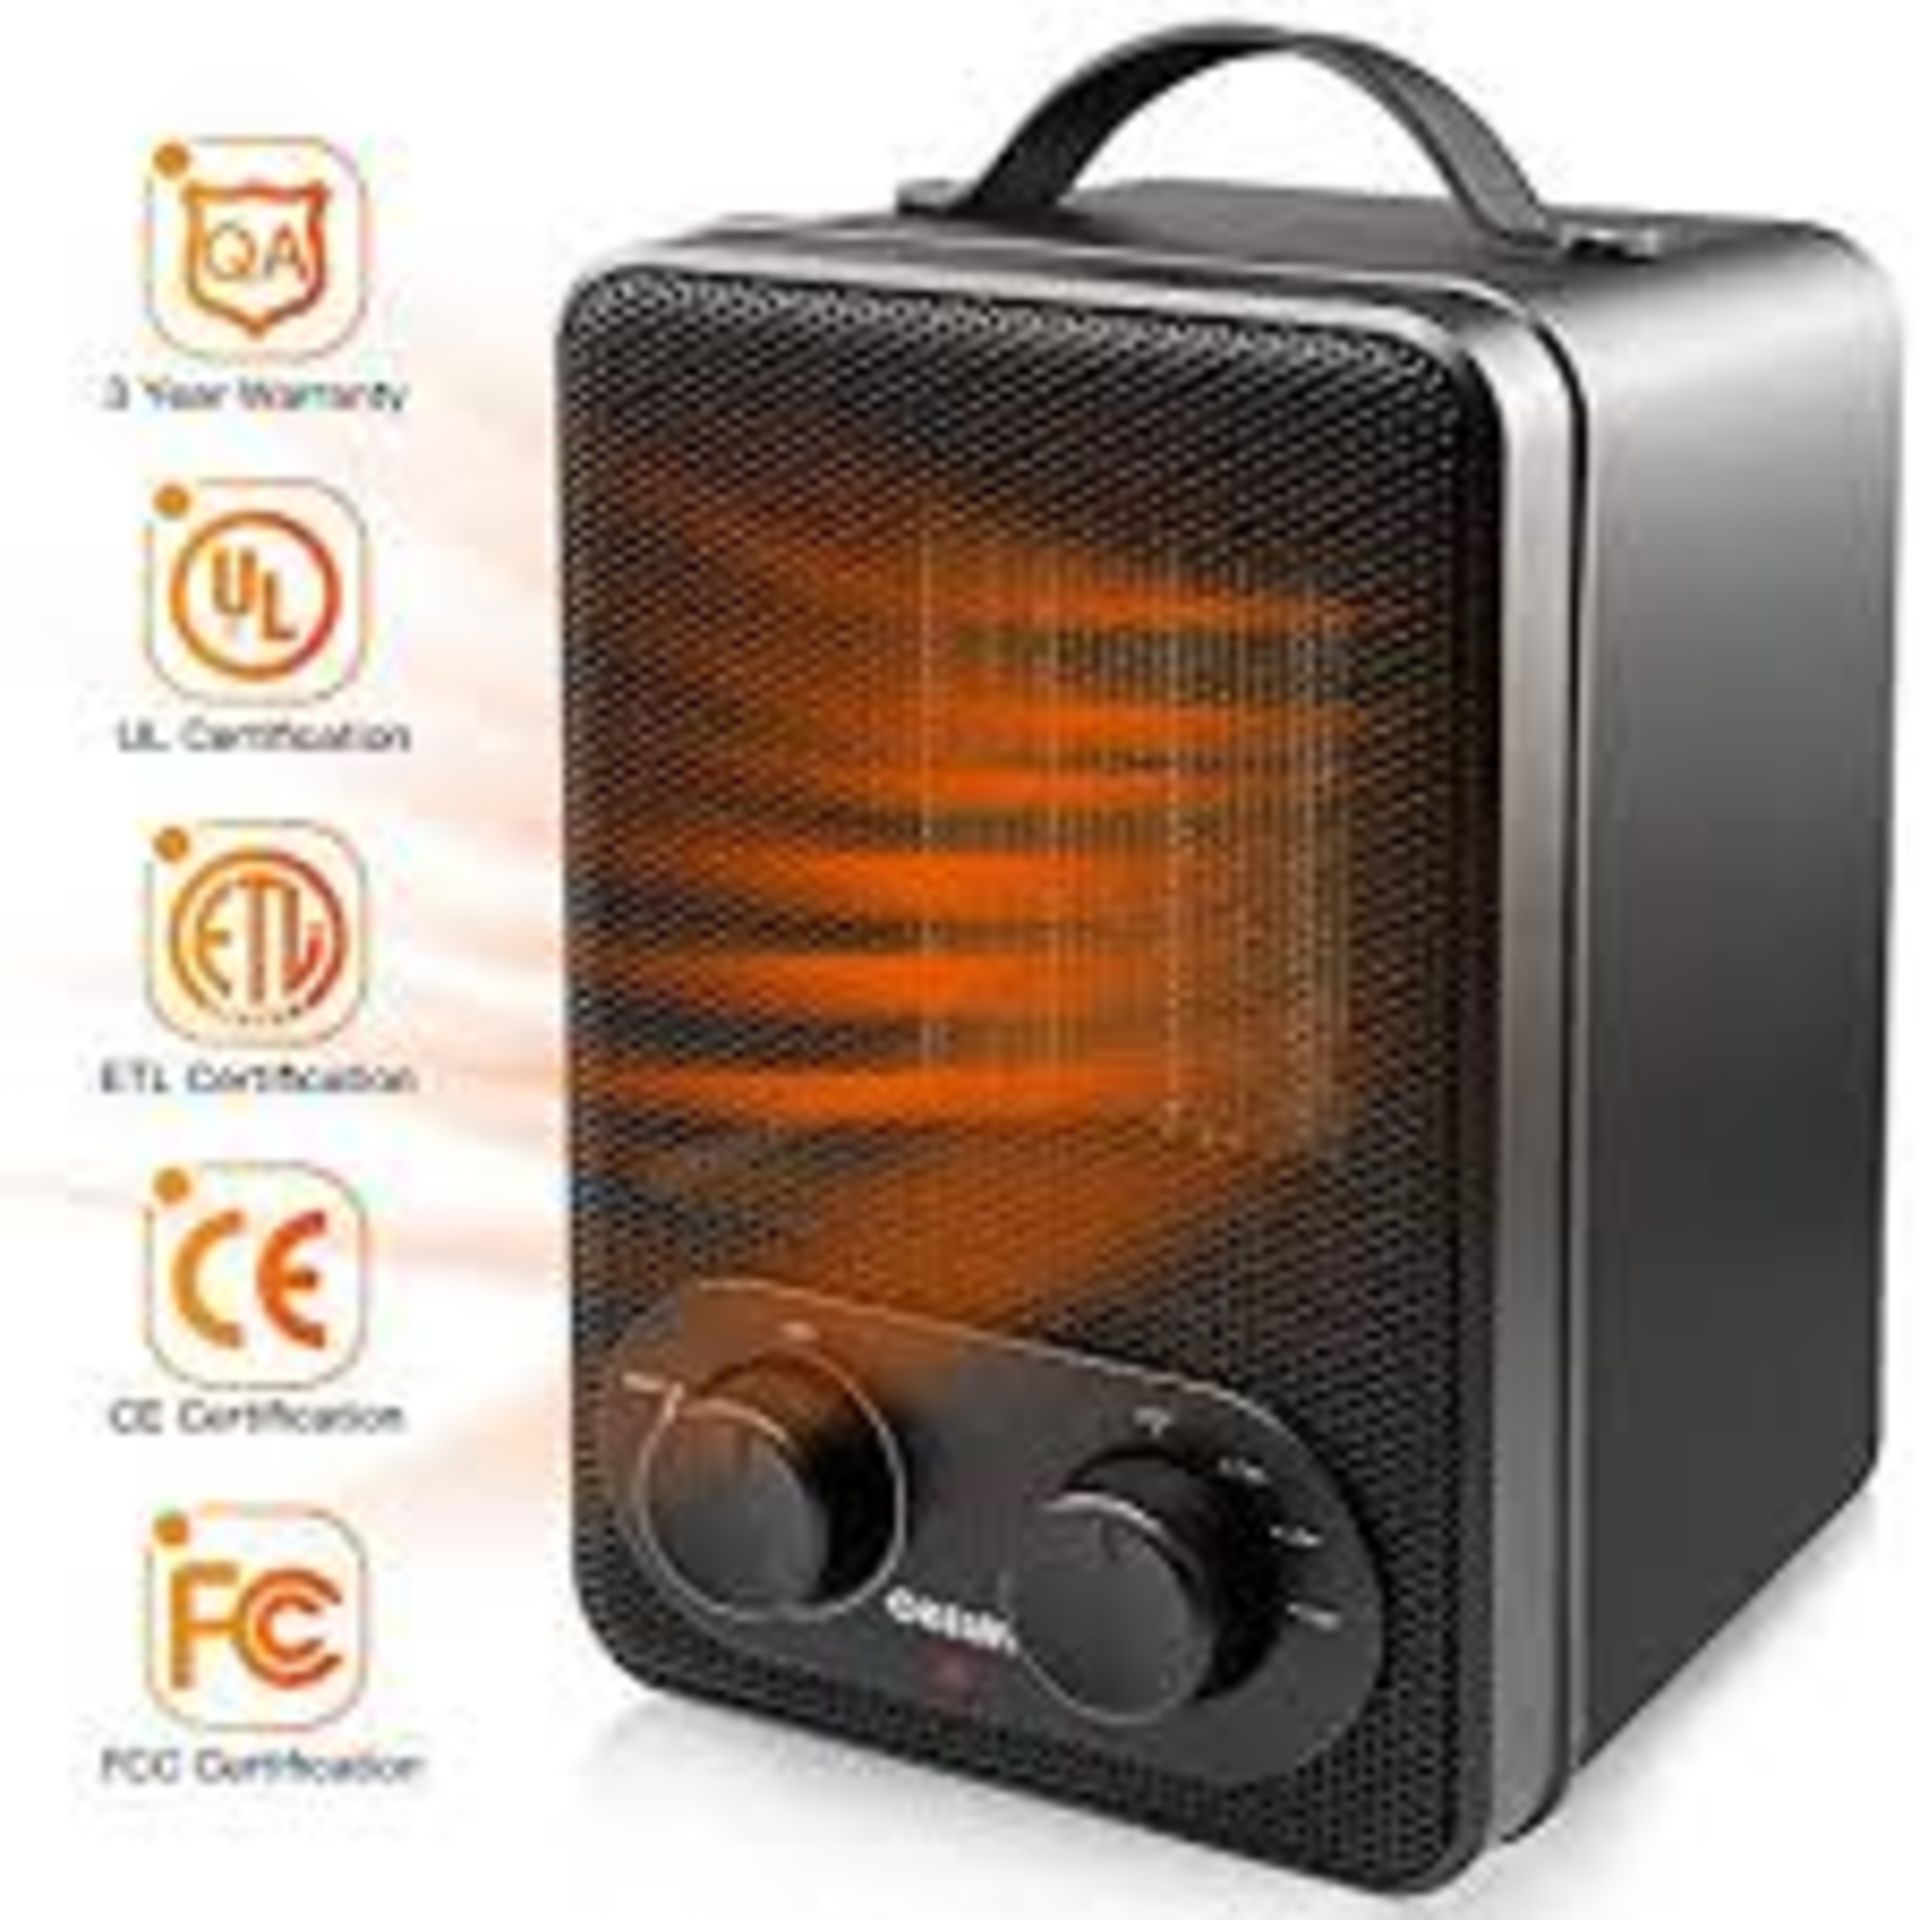 (S299) 1800W Oscillating Fan Heater. Small and discreet enough to pop on top of a desk, filing ...